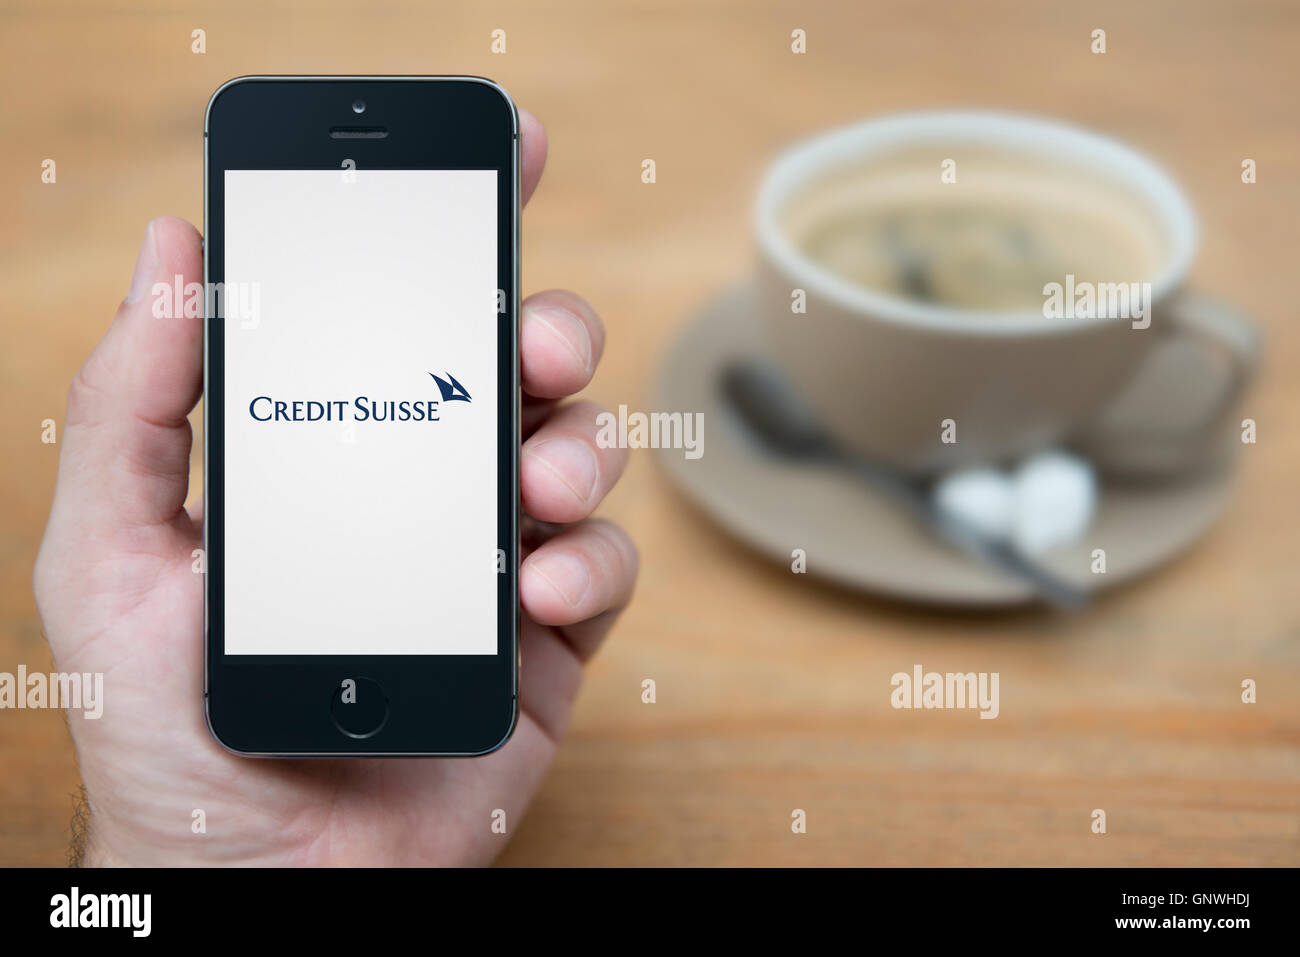 A man looks at his iPhone which displays the Credit Suisse logo, while sat with a cup of coffee (Editorial use only). Stock Photo